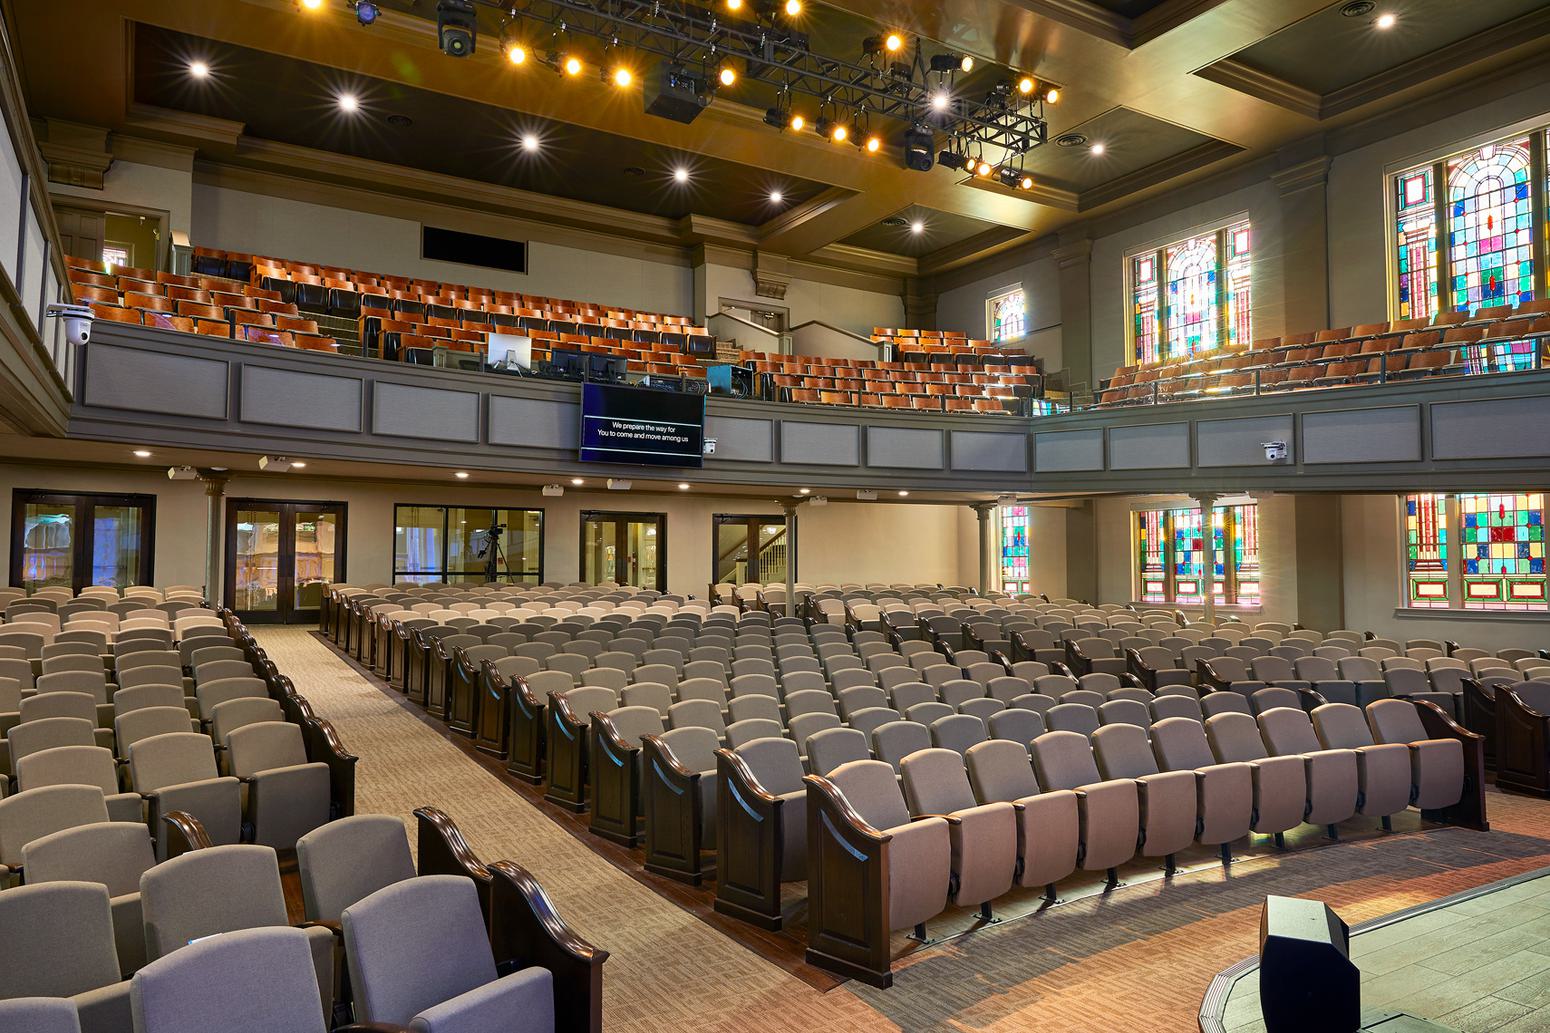 Church seating by Paragon helps beautify worship spaces.